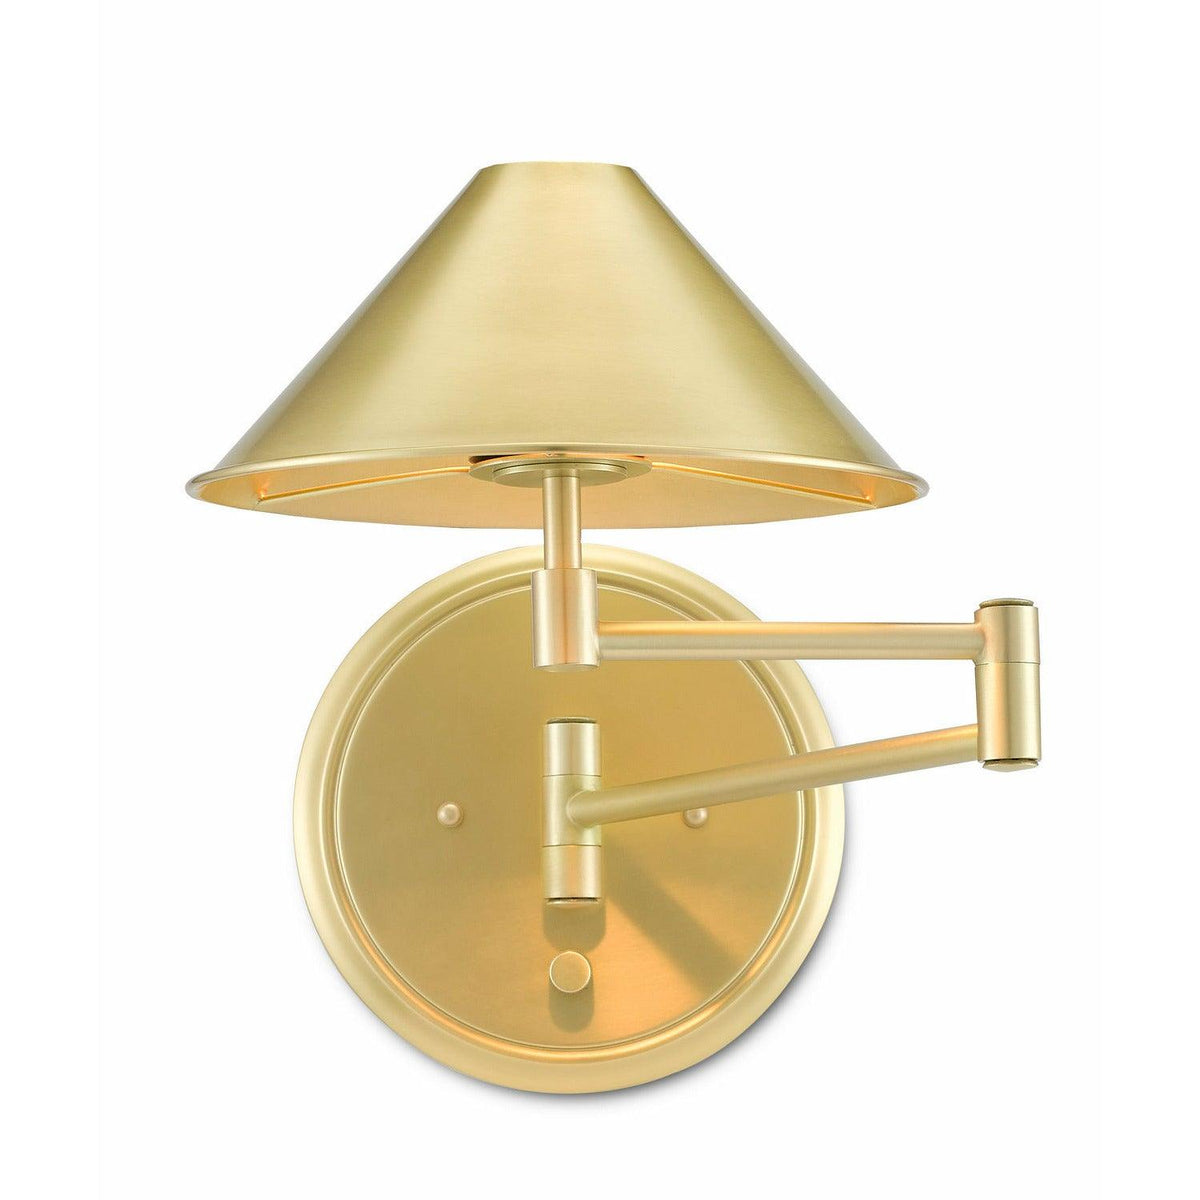 Currey and Company - Seton Swing-Arm Wall Sconce - 5000-0186 | Montreal Lighting & Hardware